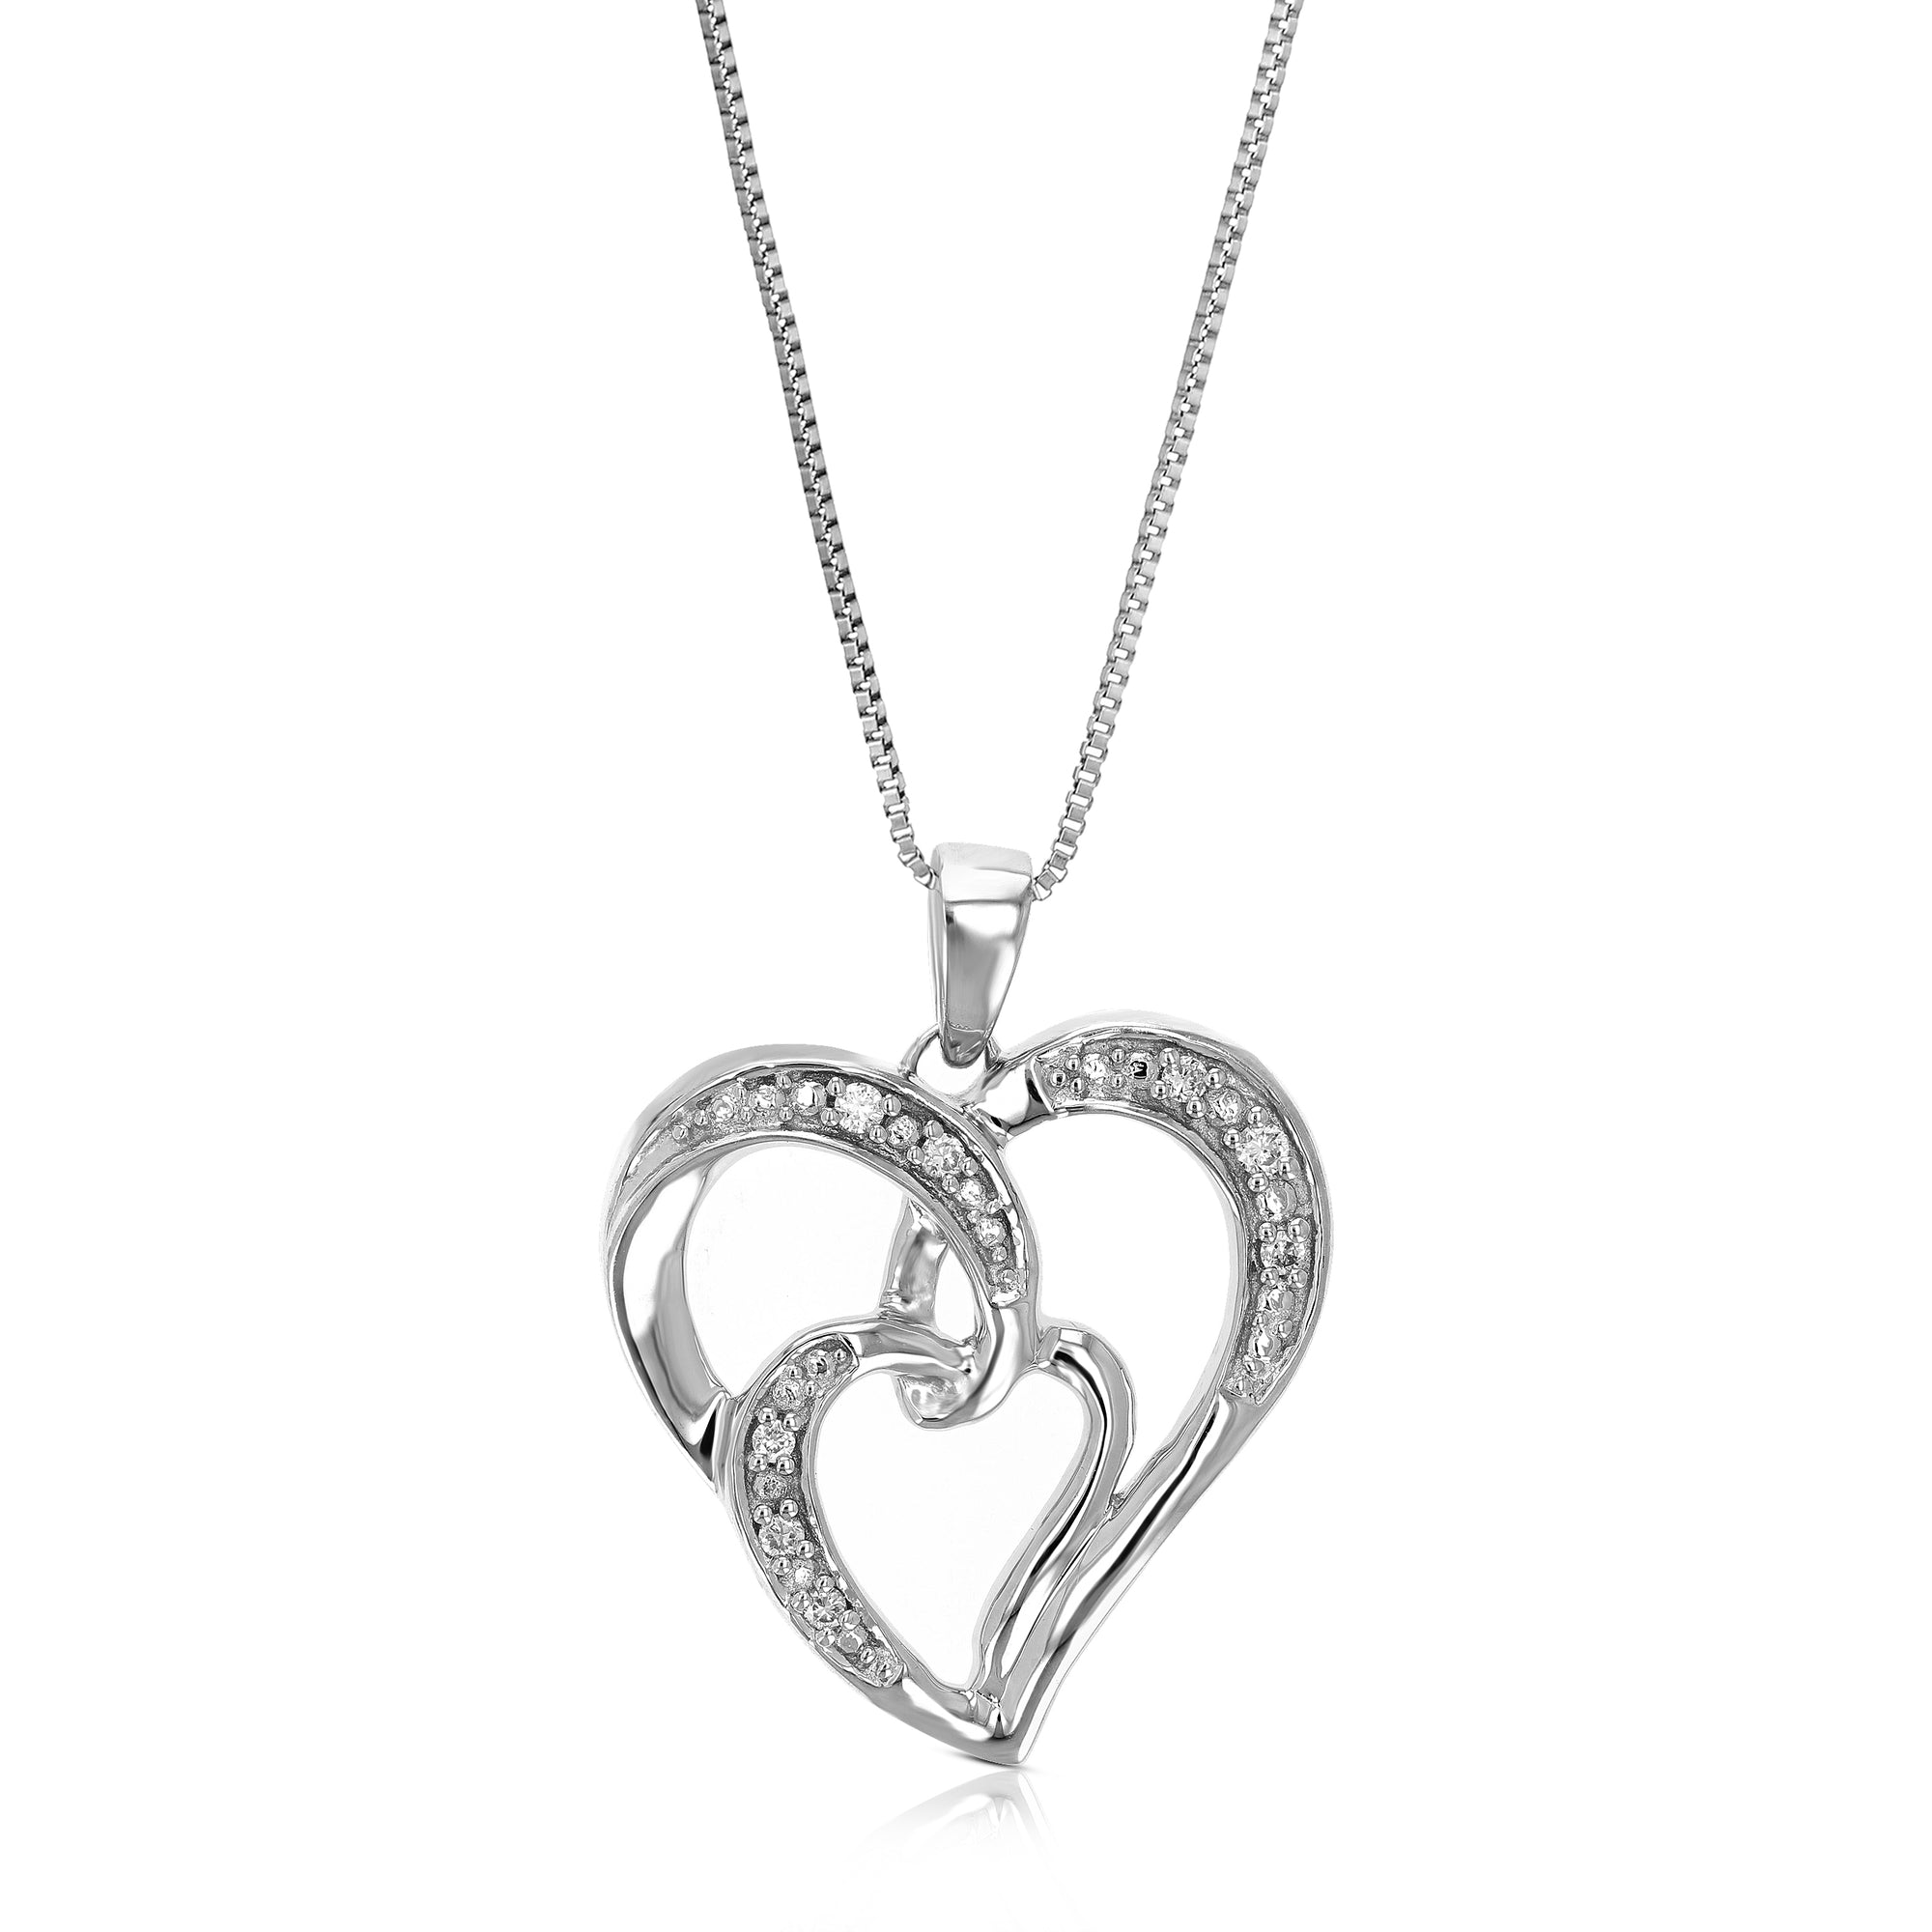 1/20 cttw 8 Stones Lab Grown Diamond Heart Pendant Necklace .925 Sterling Silver 3/4 Inch with 18 Inch Chain, Size 3/4 Inch